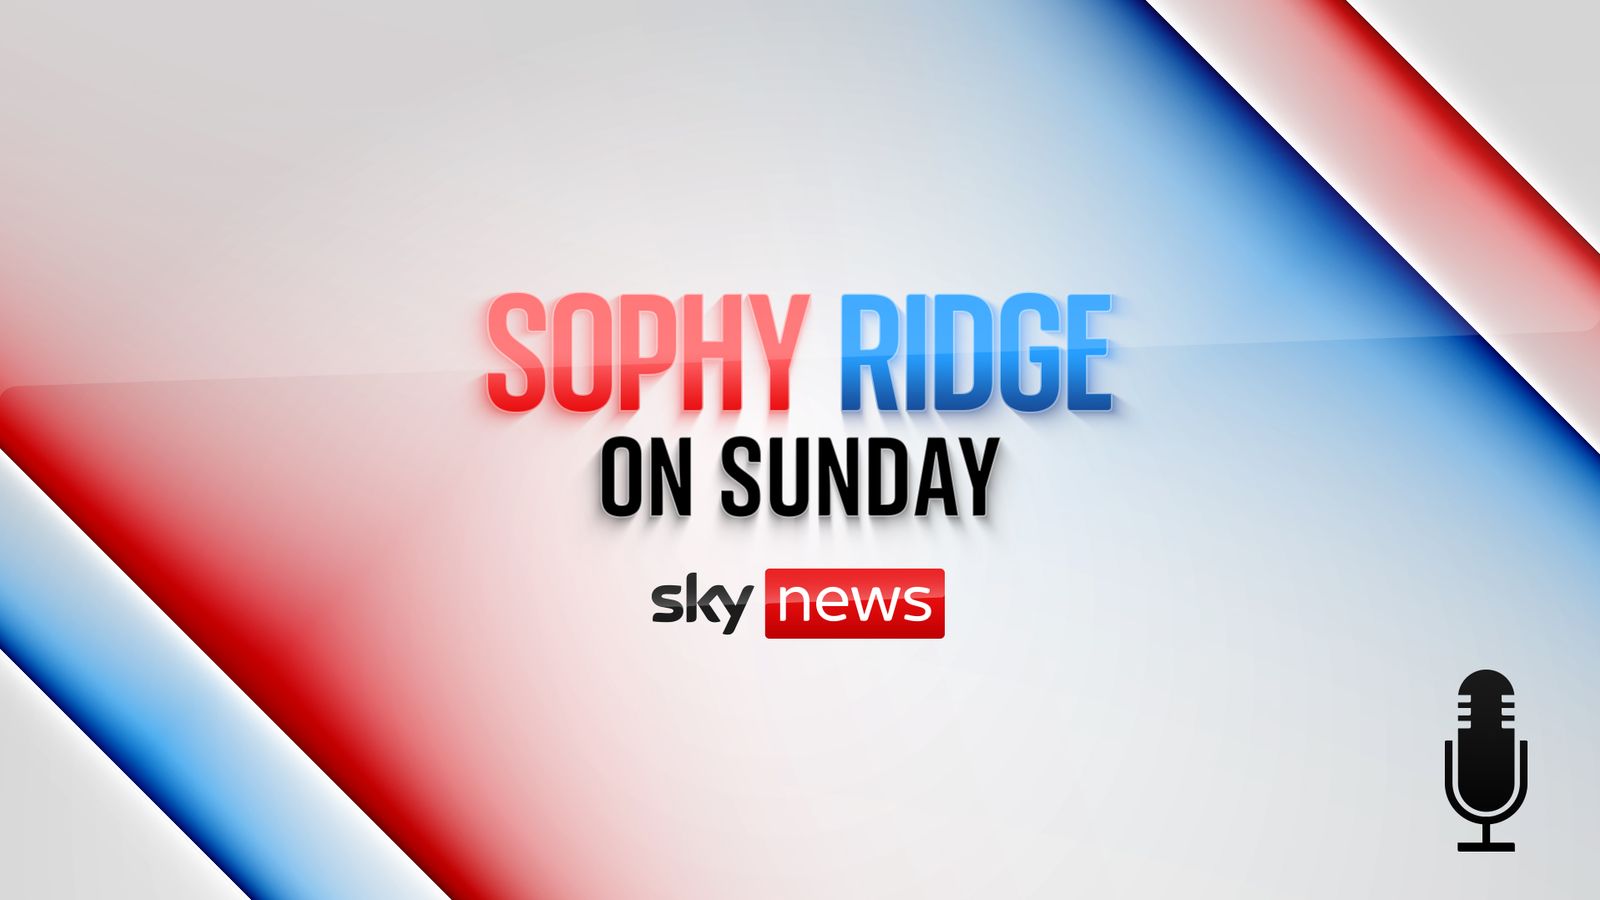 Sophy Ridge on Sunday podcast: Yes to trees, not tree-huggers | Rachel Reeves and Victoria Atkins